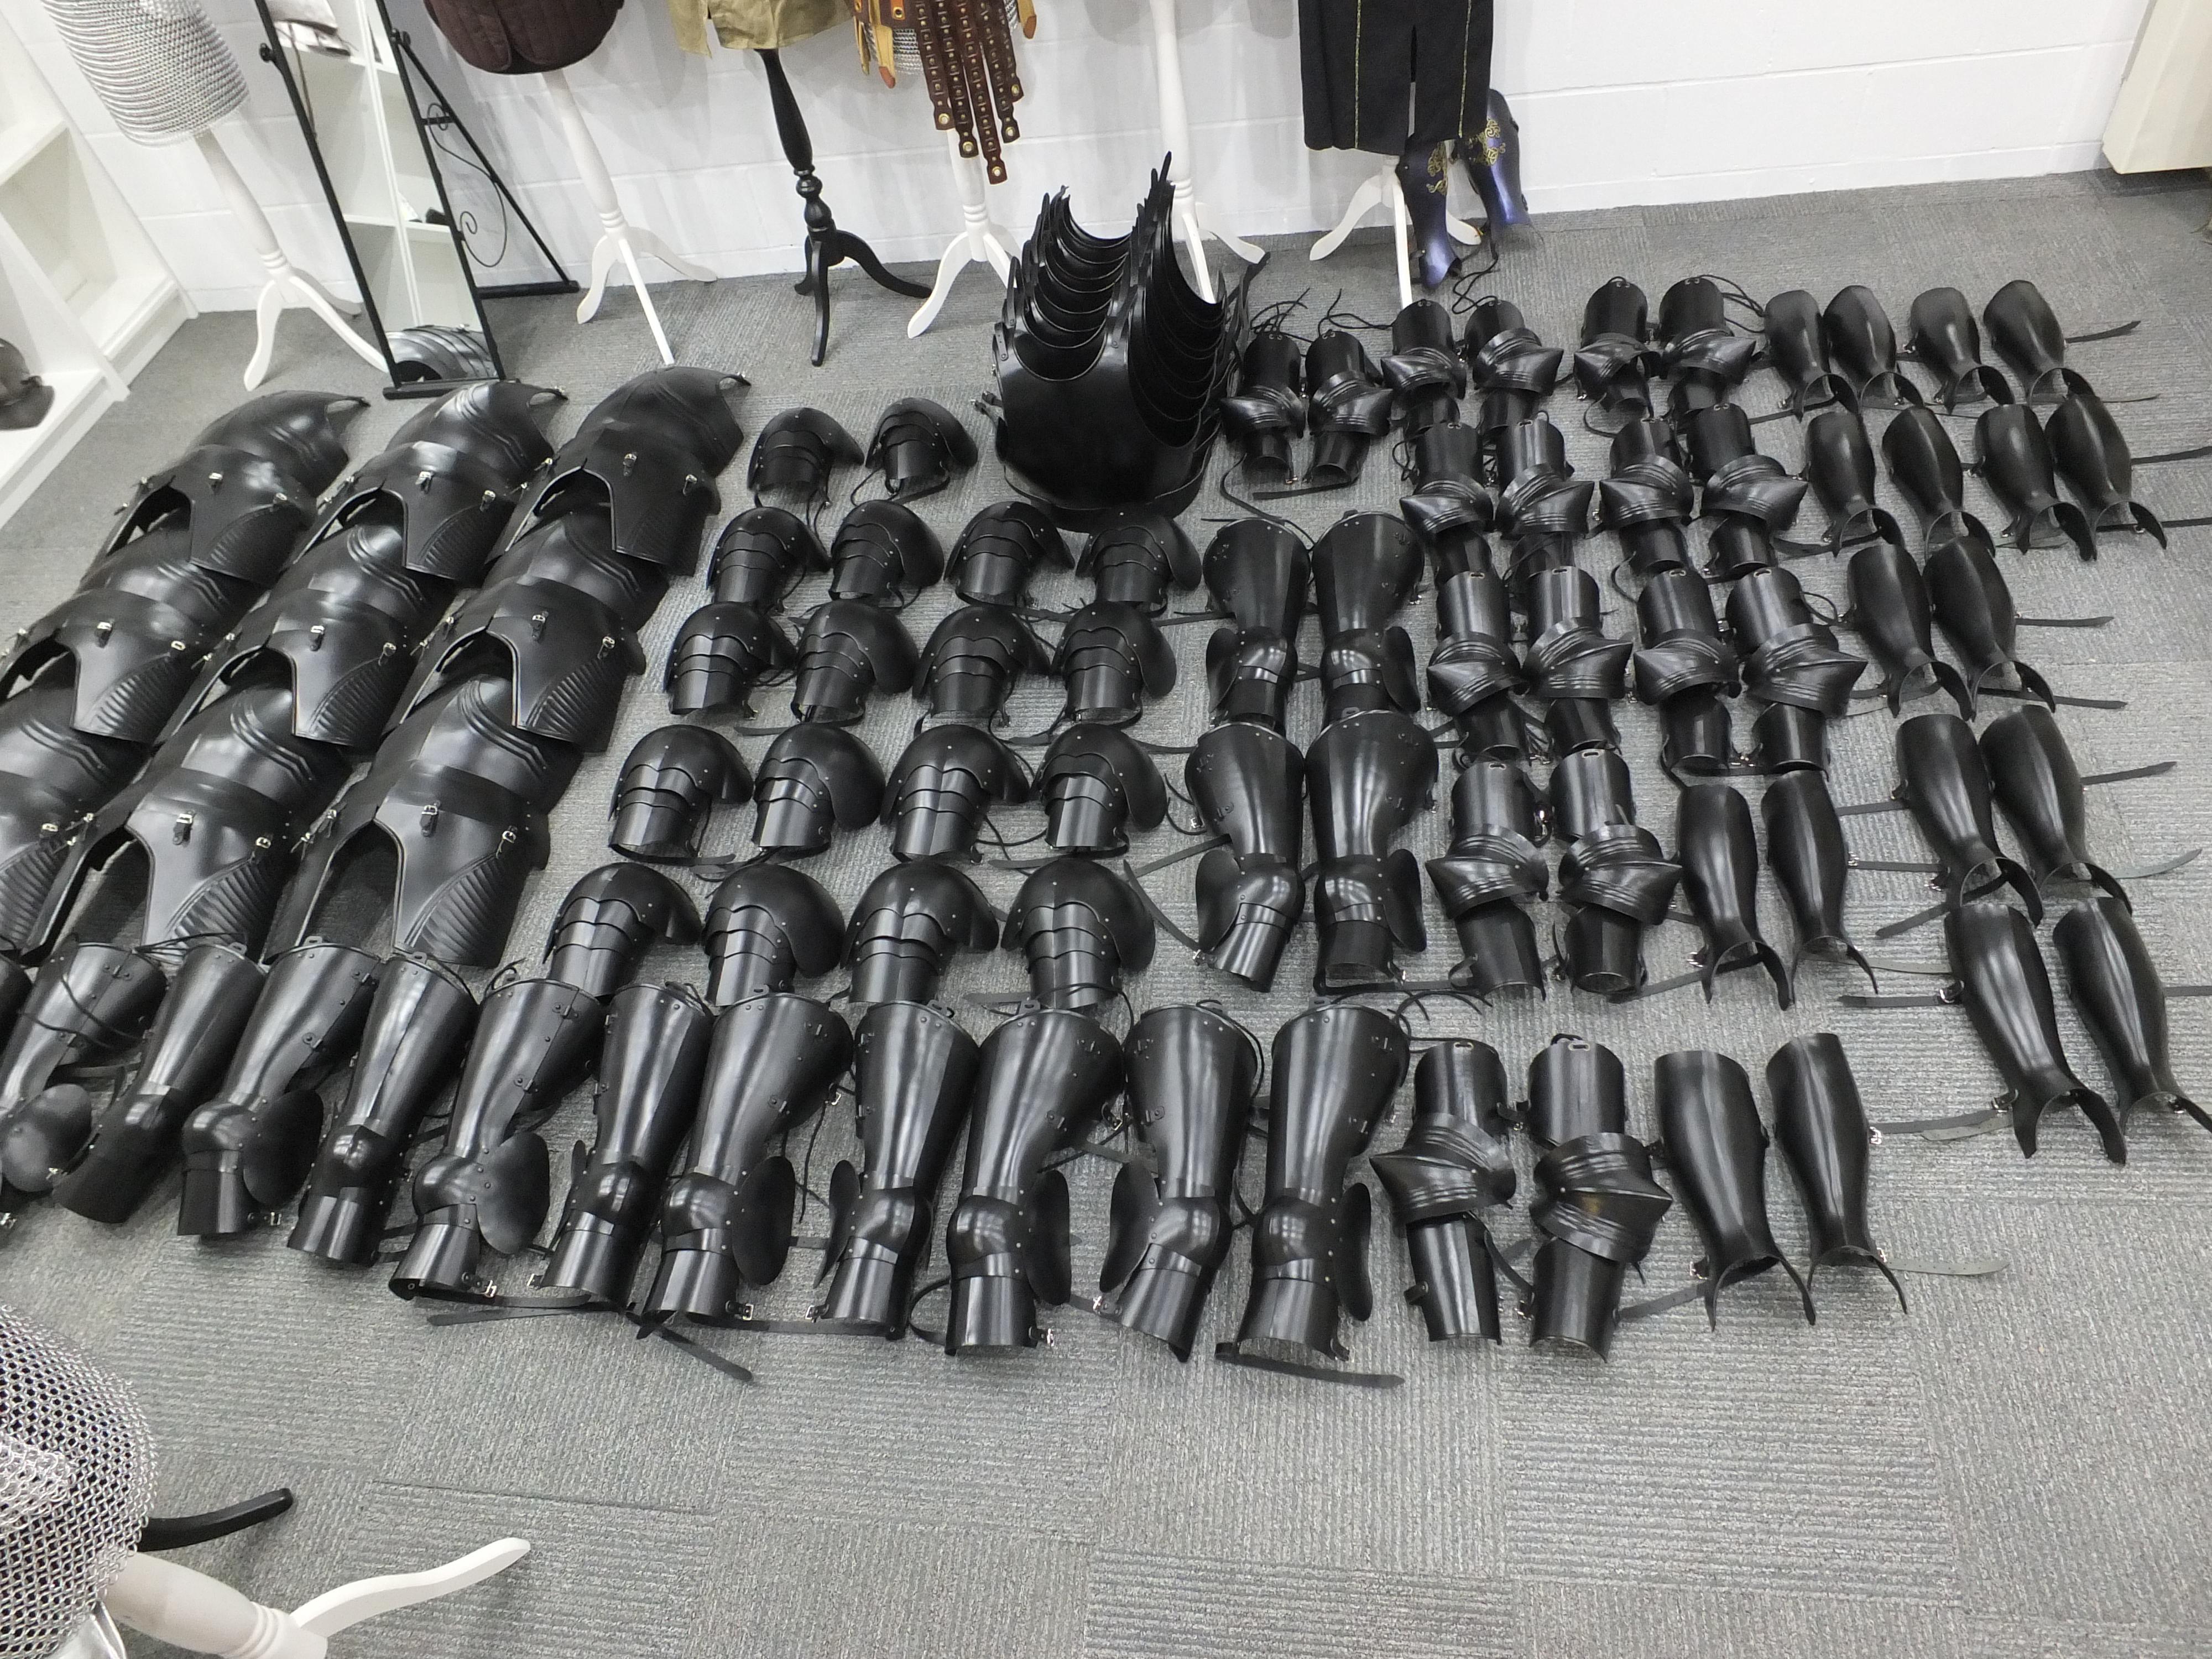 Gothic armour sets for a film production